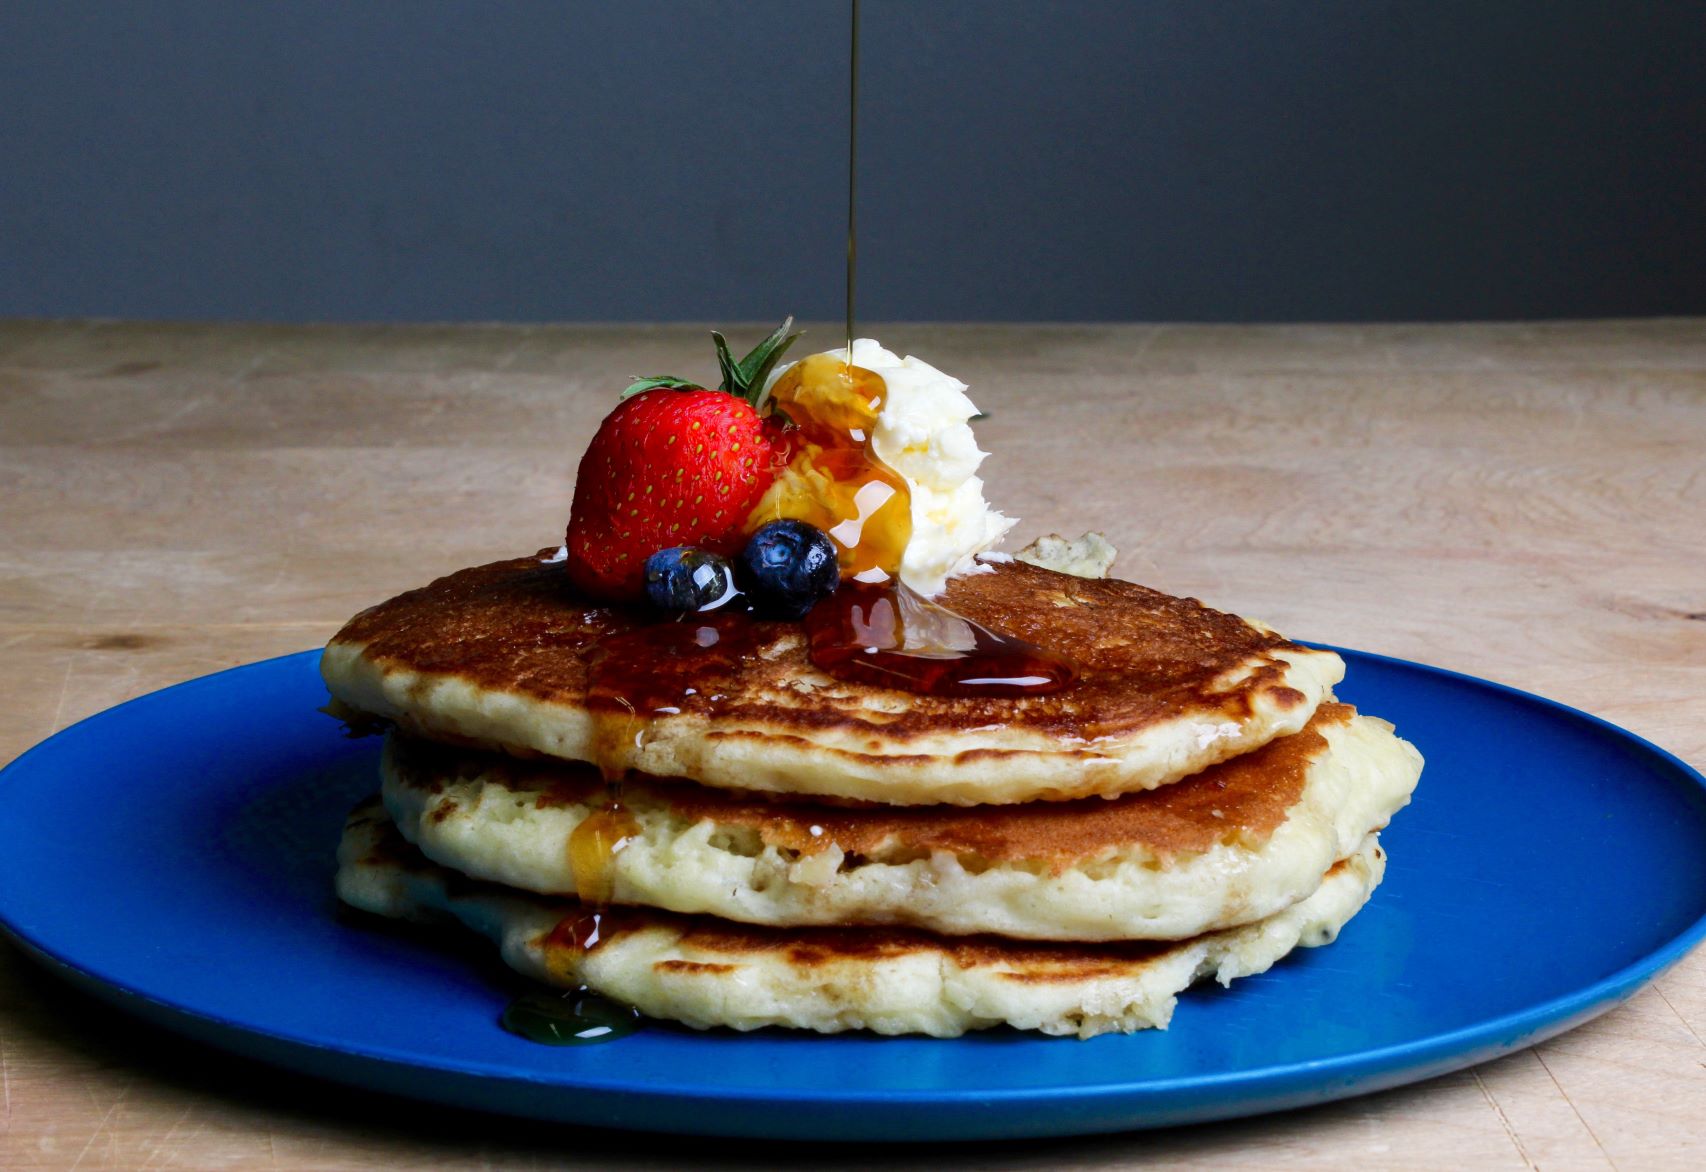 A pile of three pancakes on a blue plate with maple syrup, berries and butter.